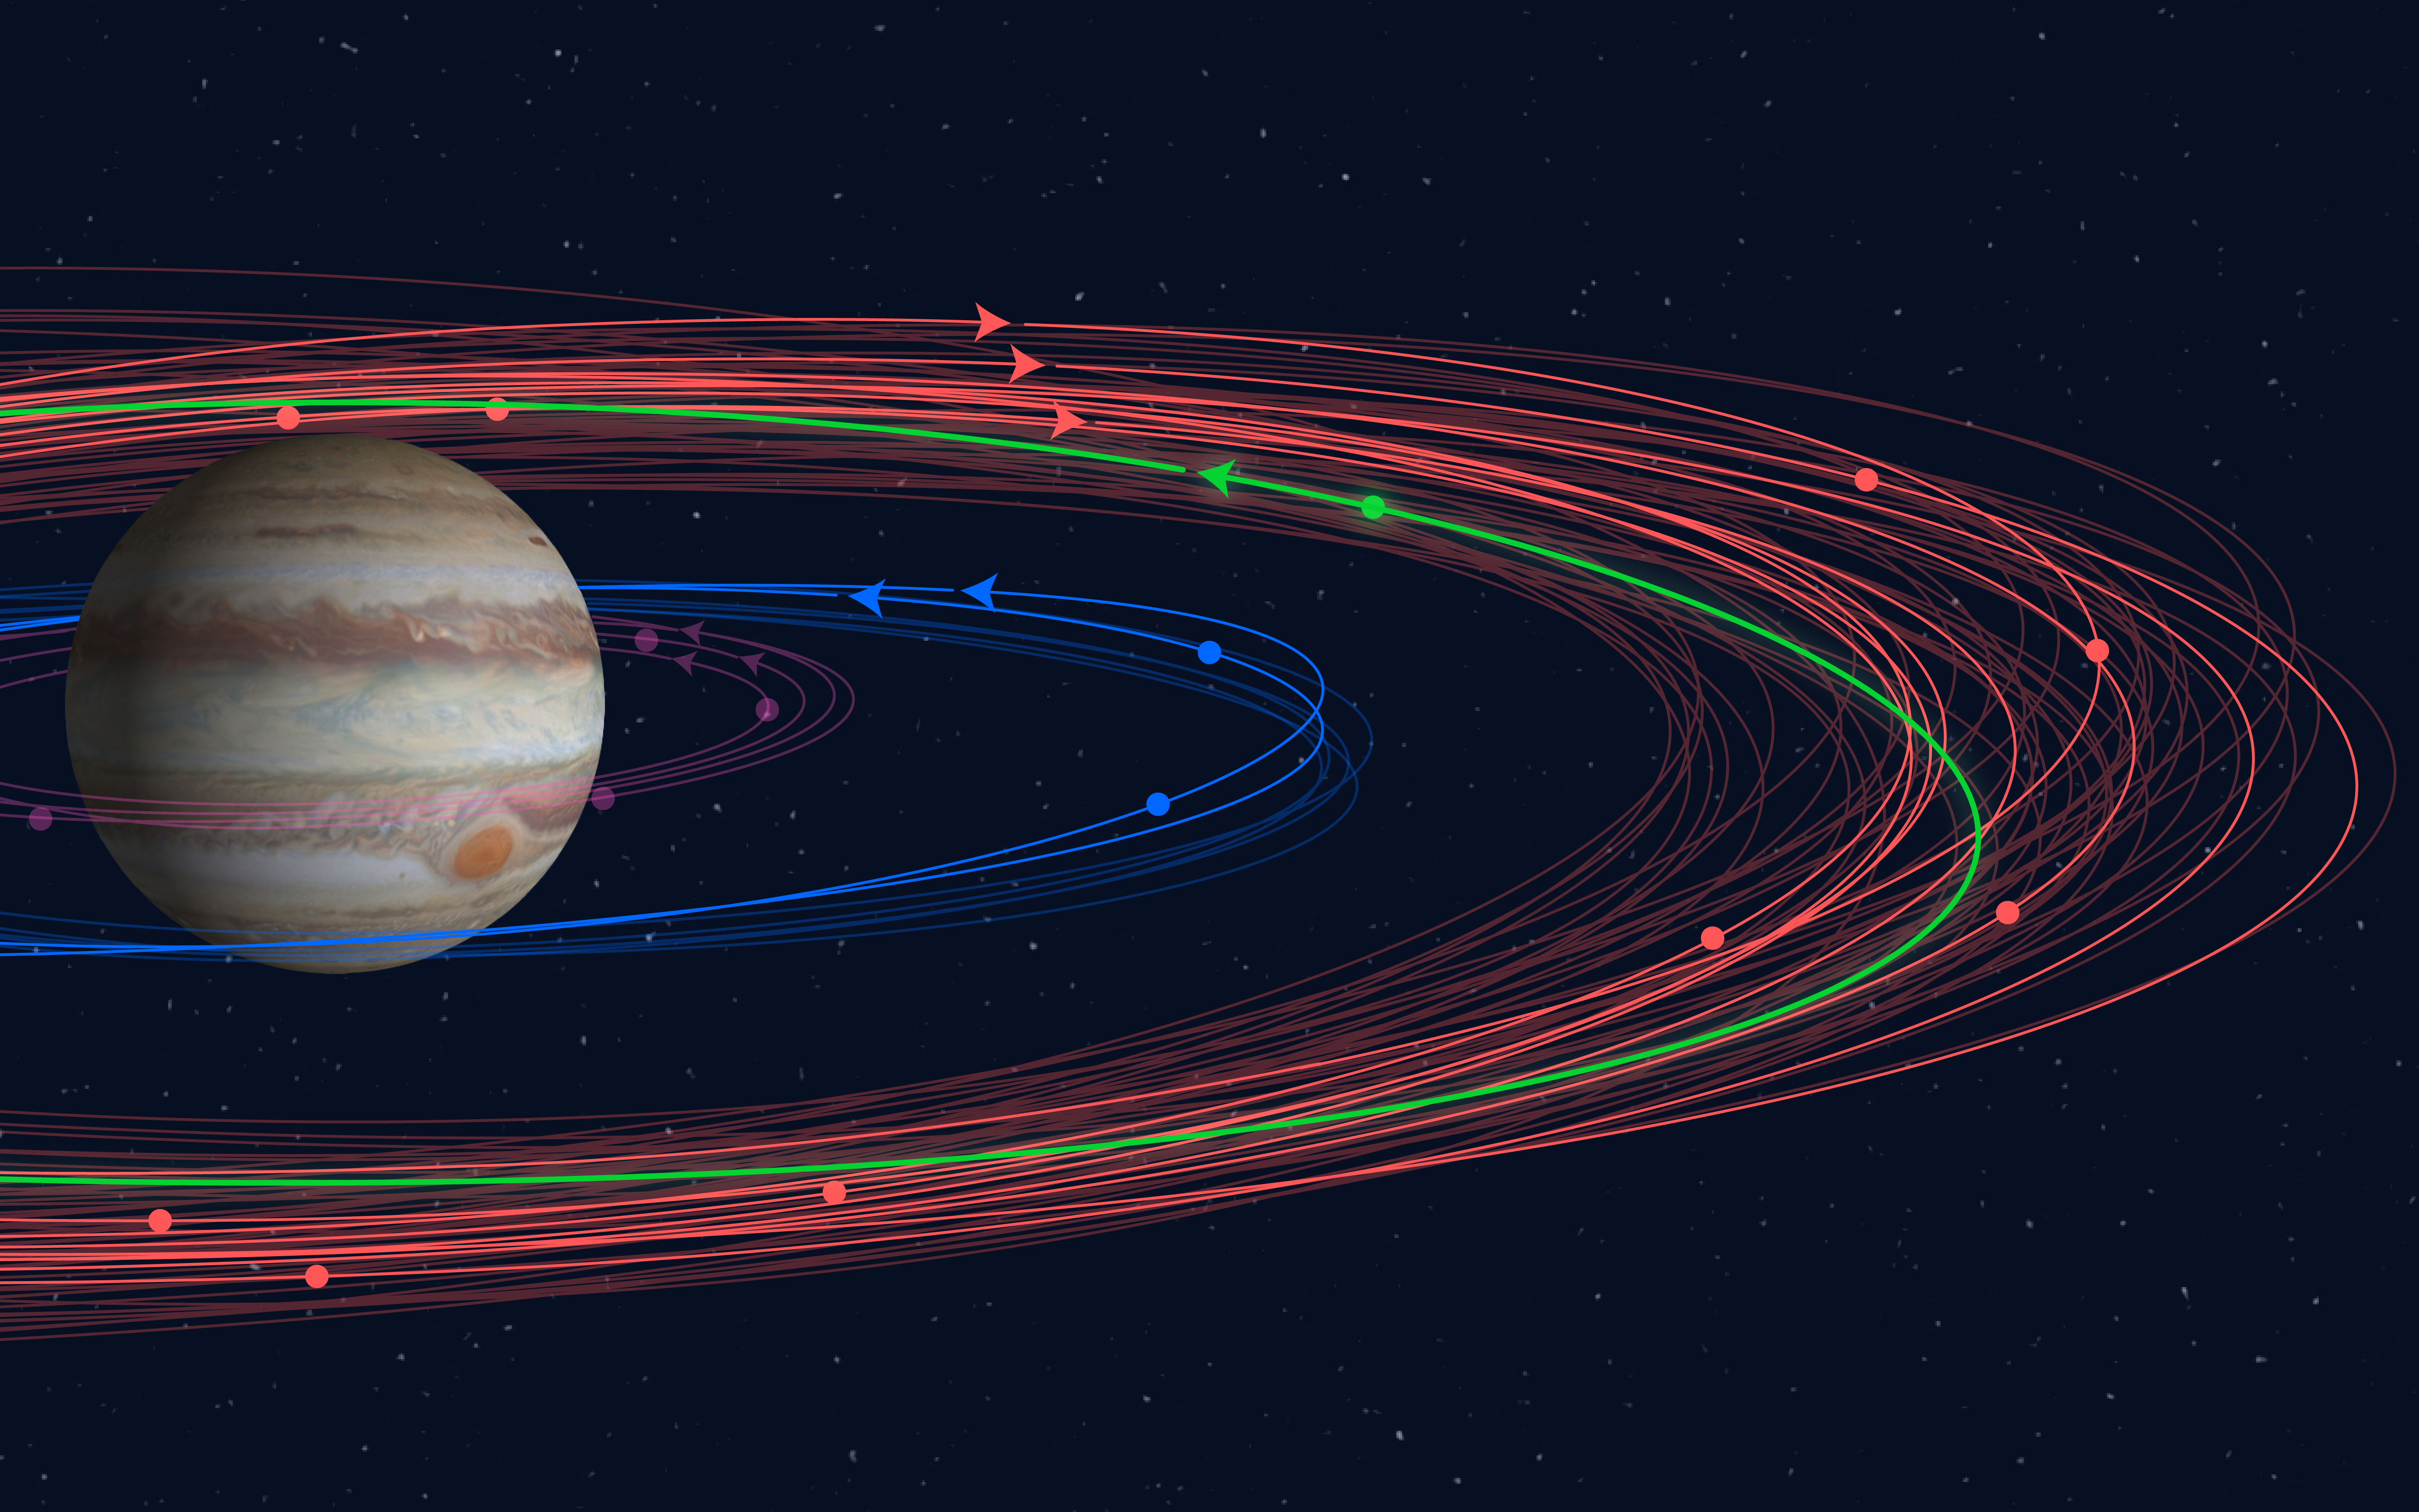 A dozen new moons of Jupiter discovered, including one “oddball